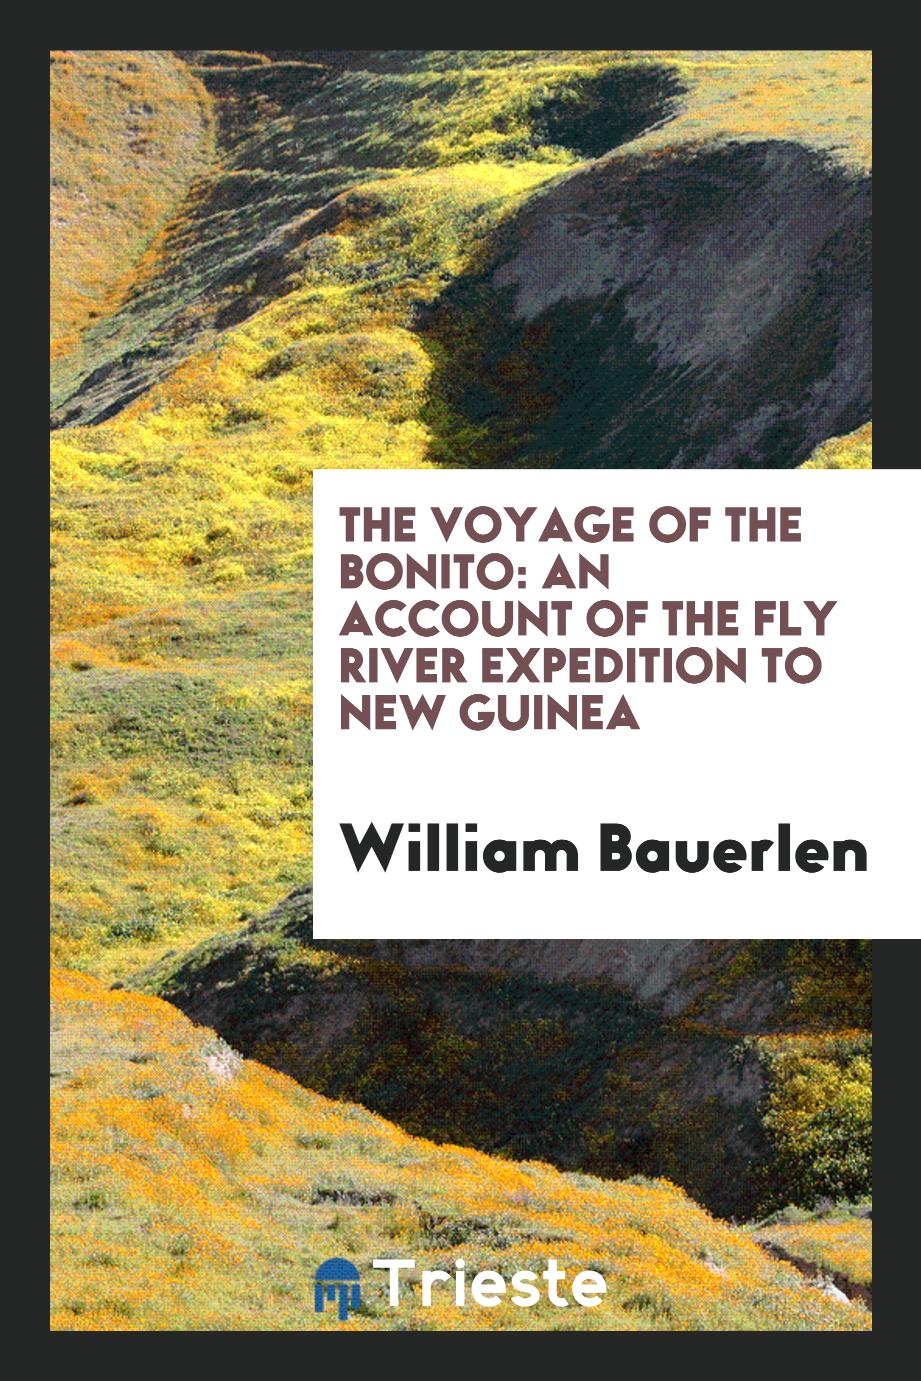 The voyage of the Bonito: an account of the Fly River Expedition to New Guinea